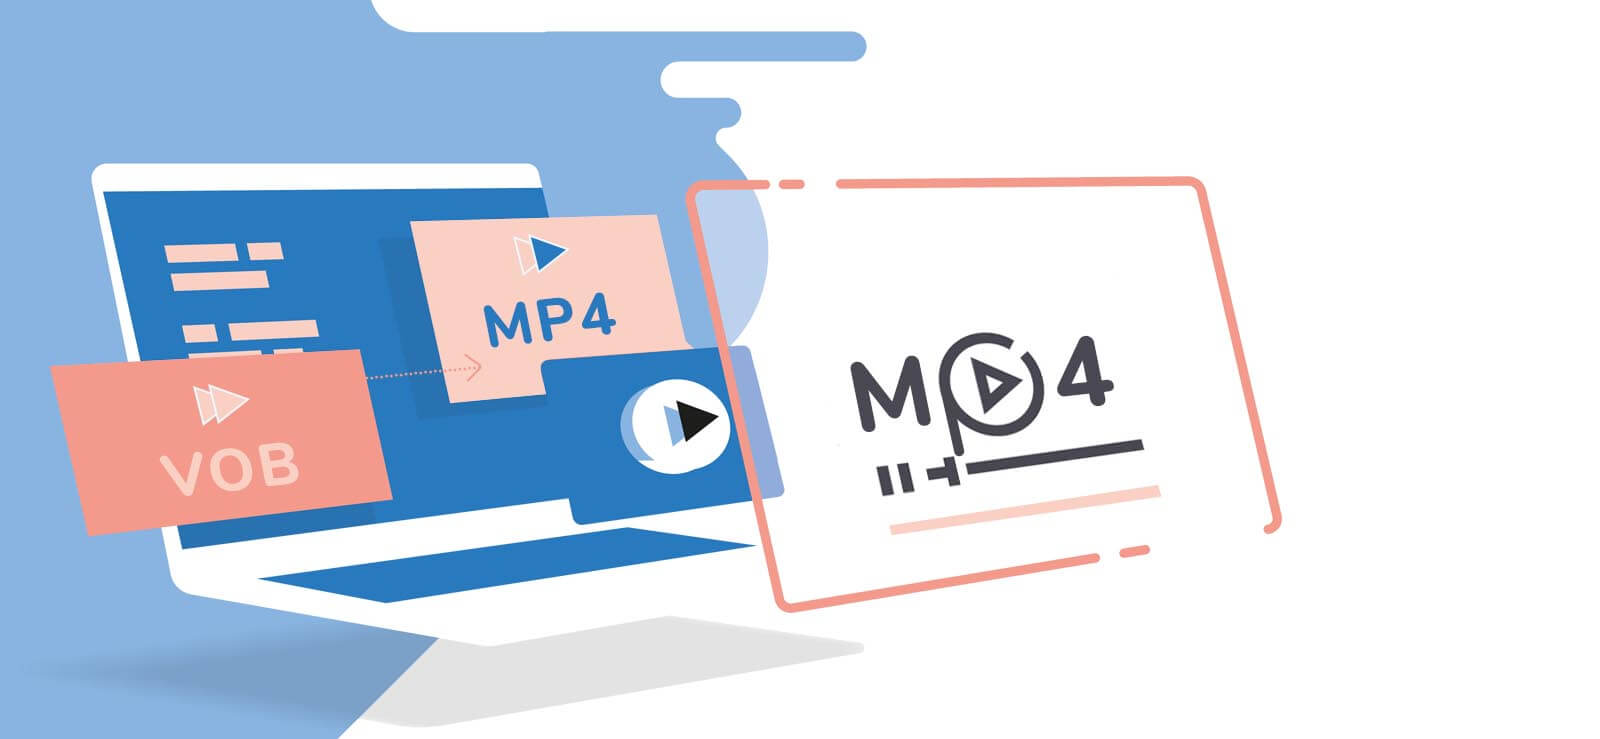 Easily Convert VOB Video Files to MP4 Format